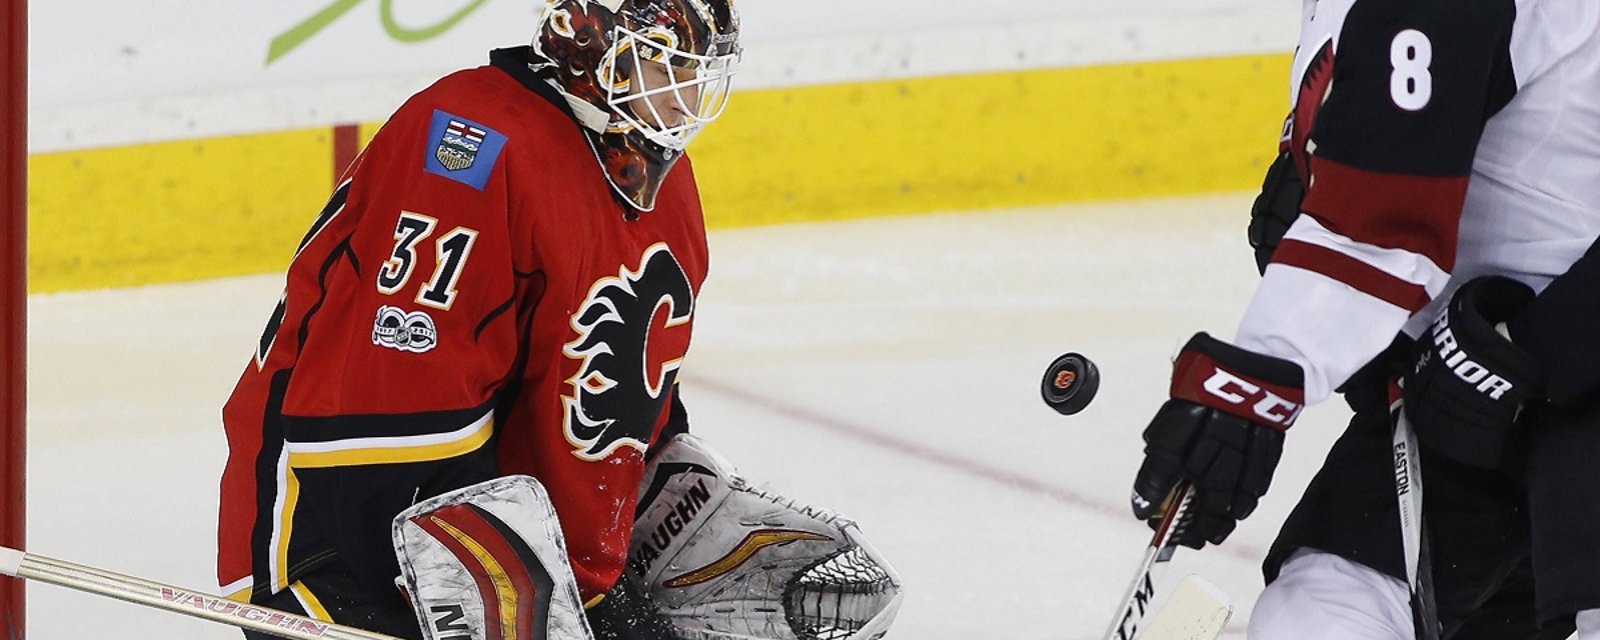 Breaking: Flames goalie will represent Canada at the World Championship.